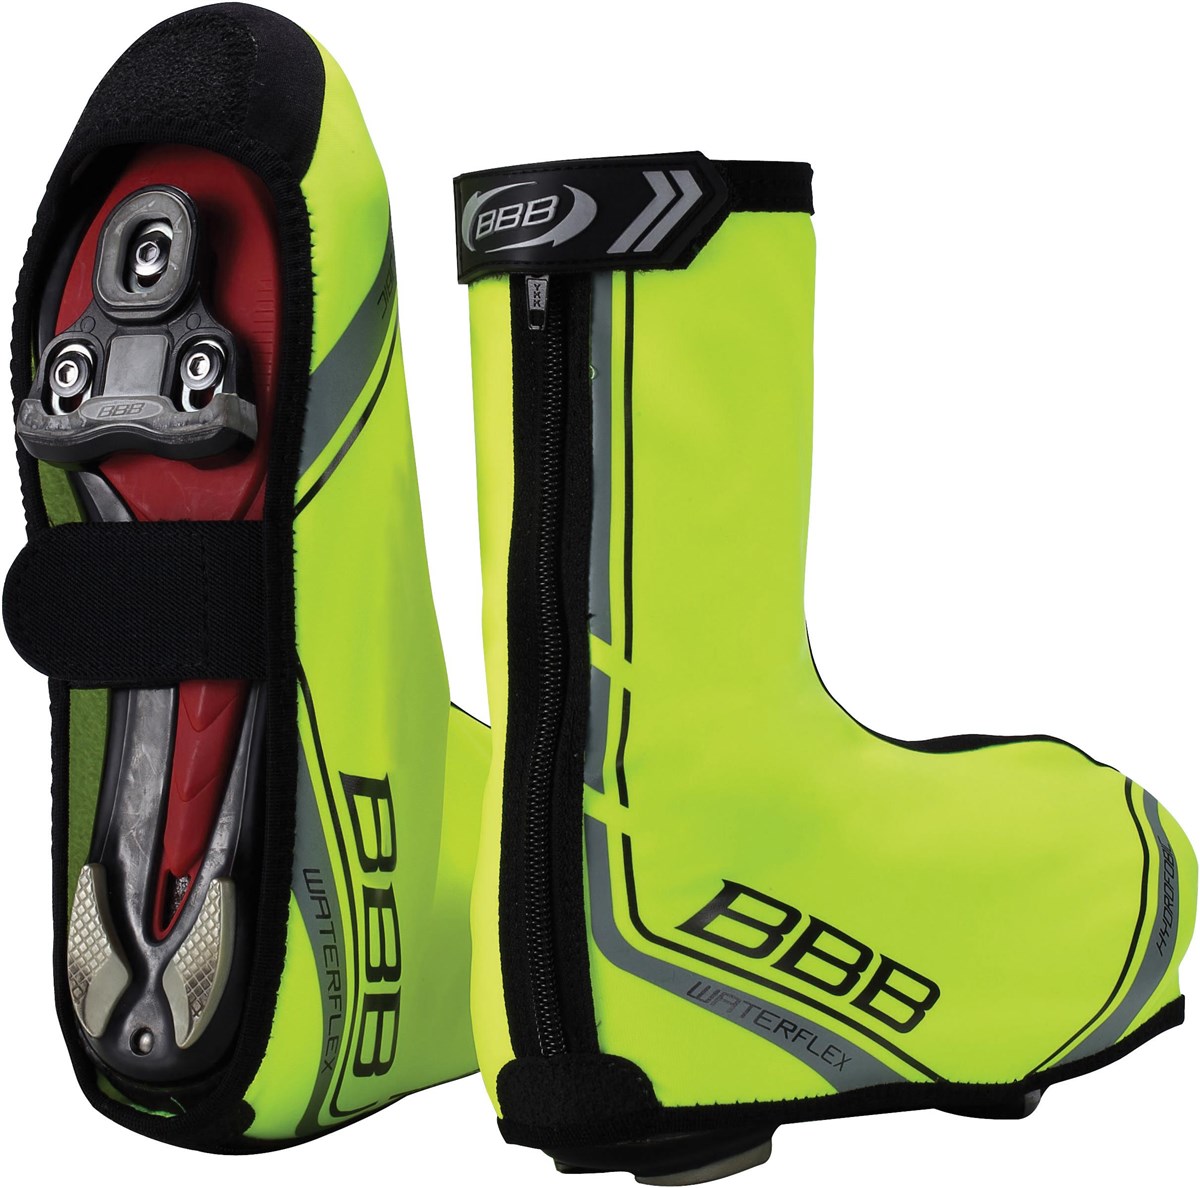 BBB BWS-03 WaterFlex Shoe Covers product image